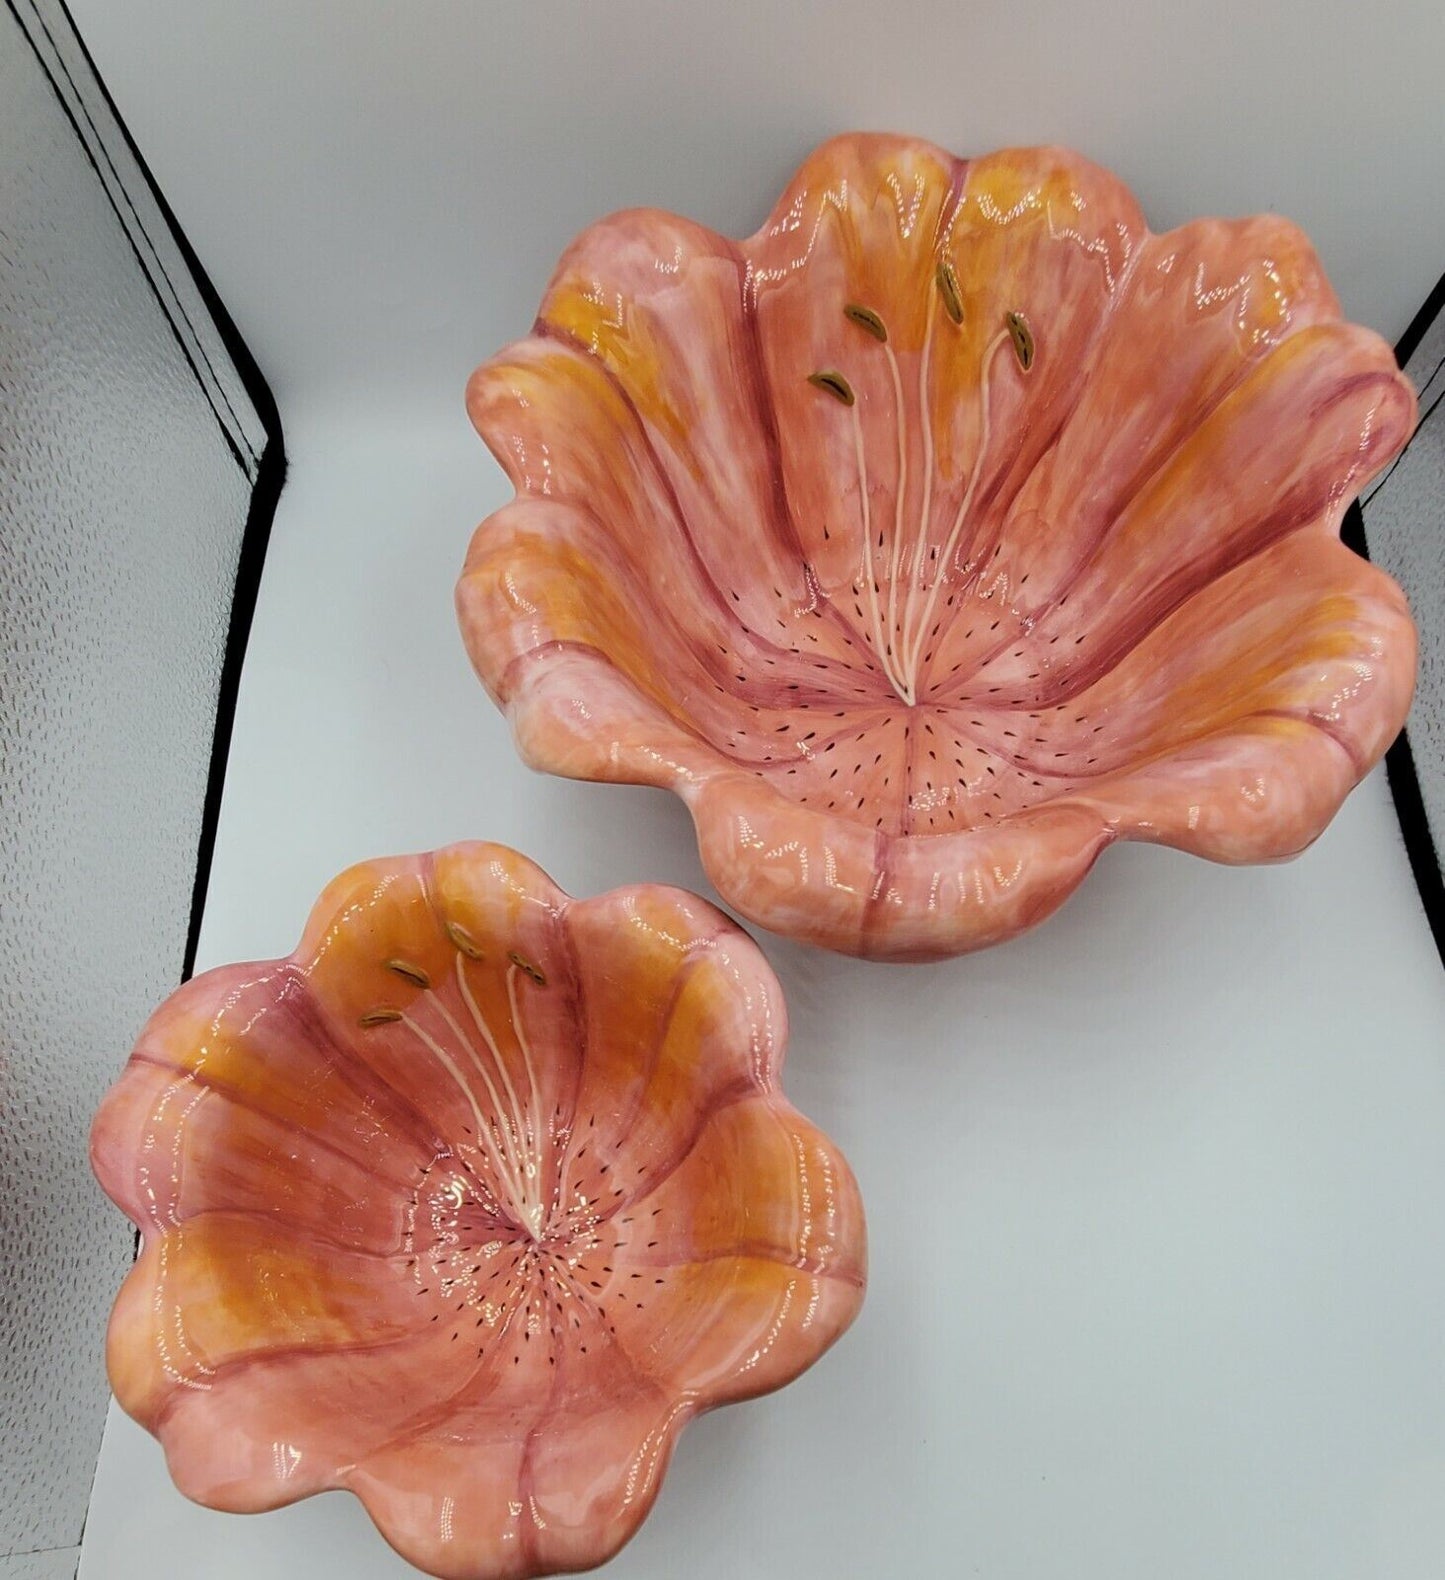 Pair of Perfectly Pink Flower Serving Bowls